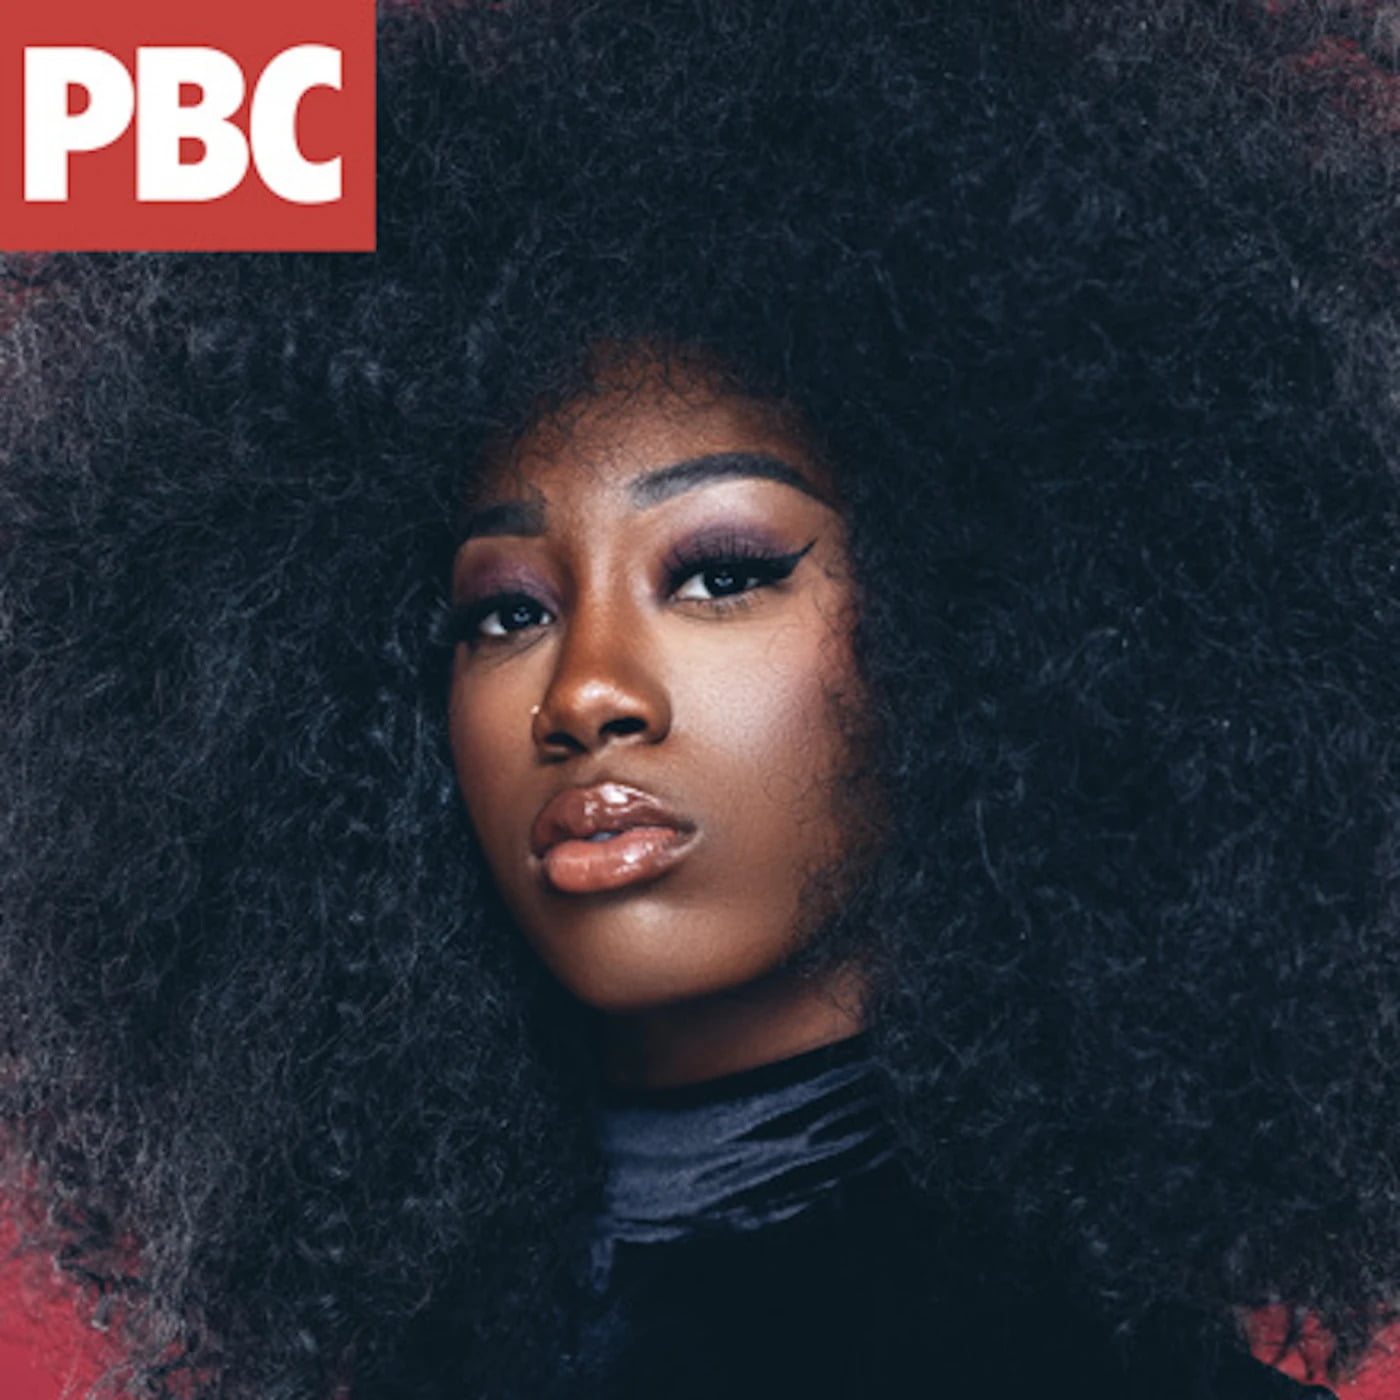 Flo Milli Debuts Her Music Video For "PBC"